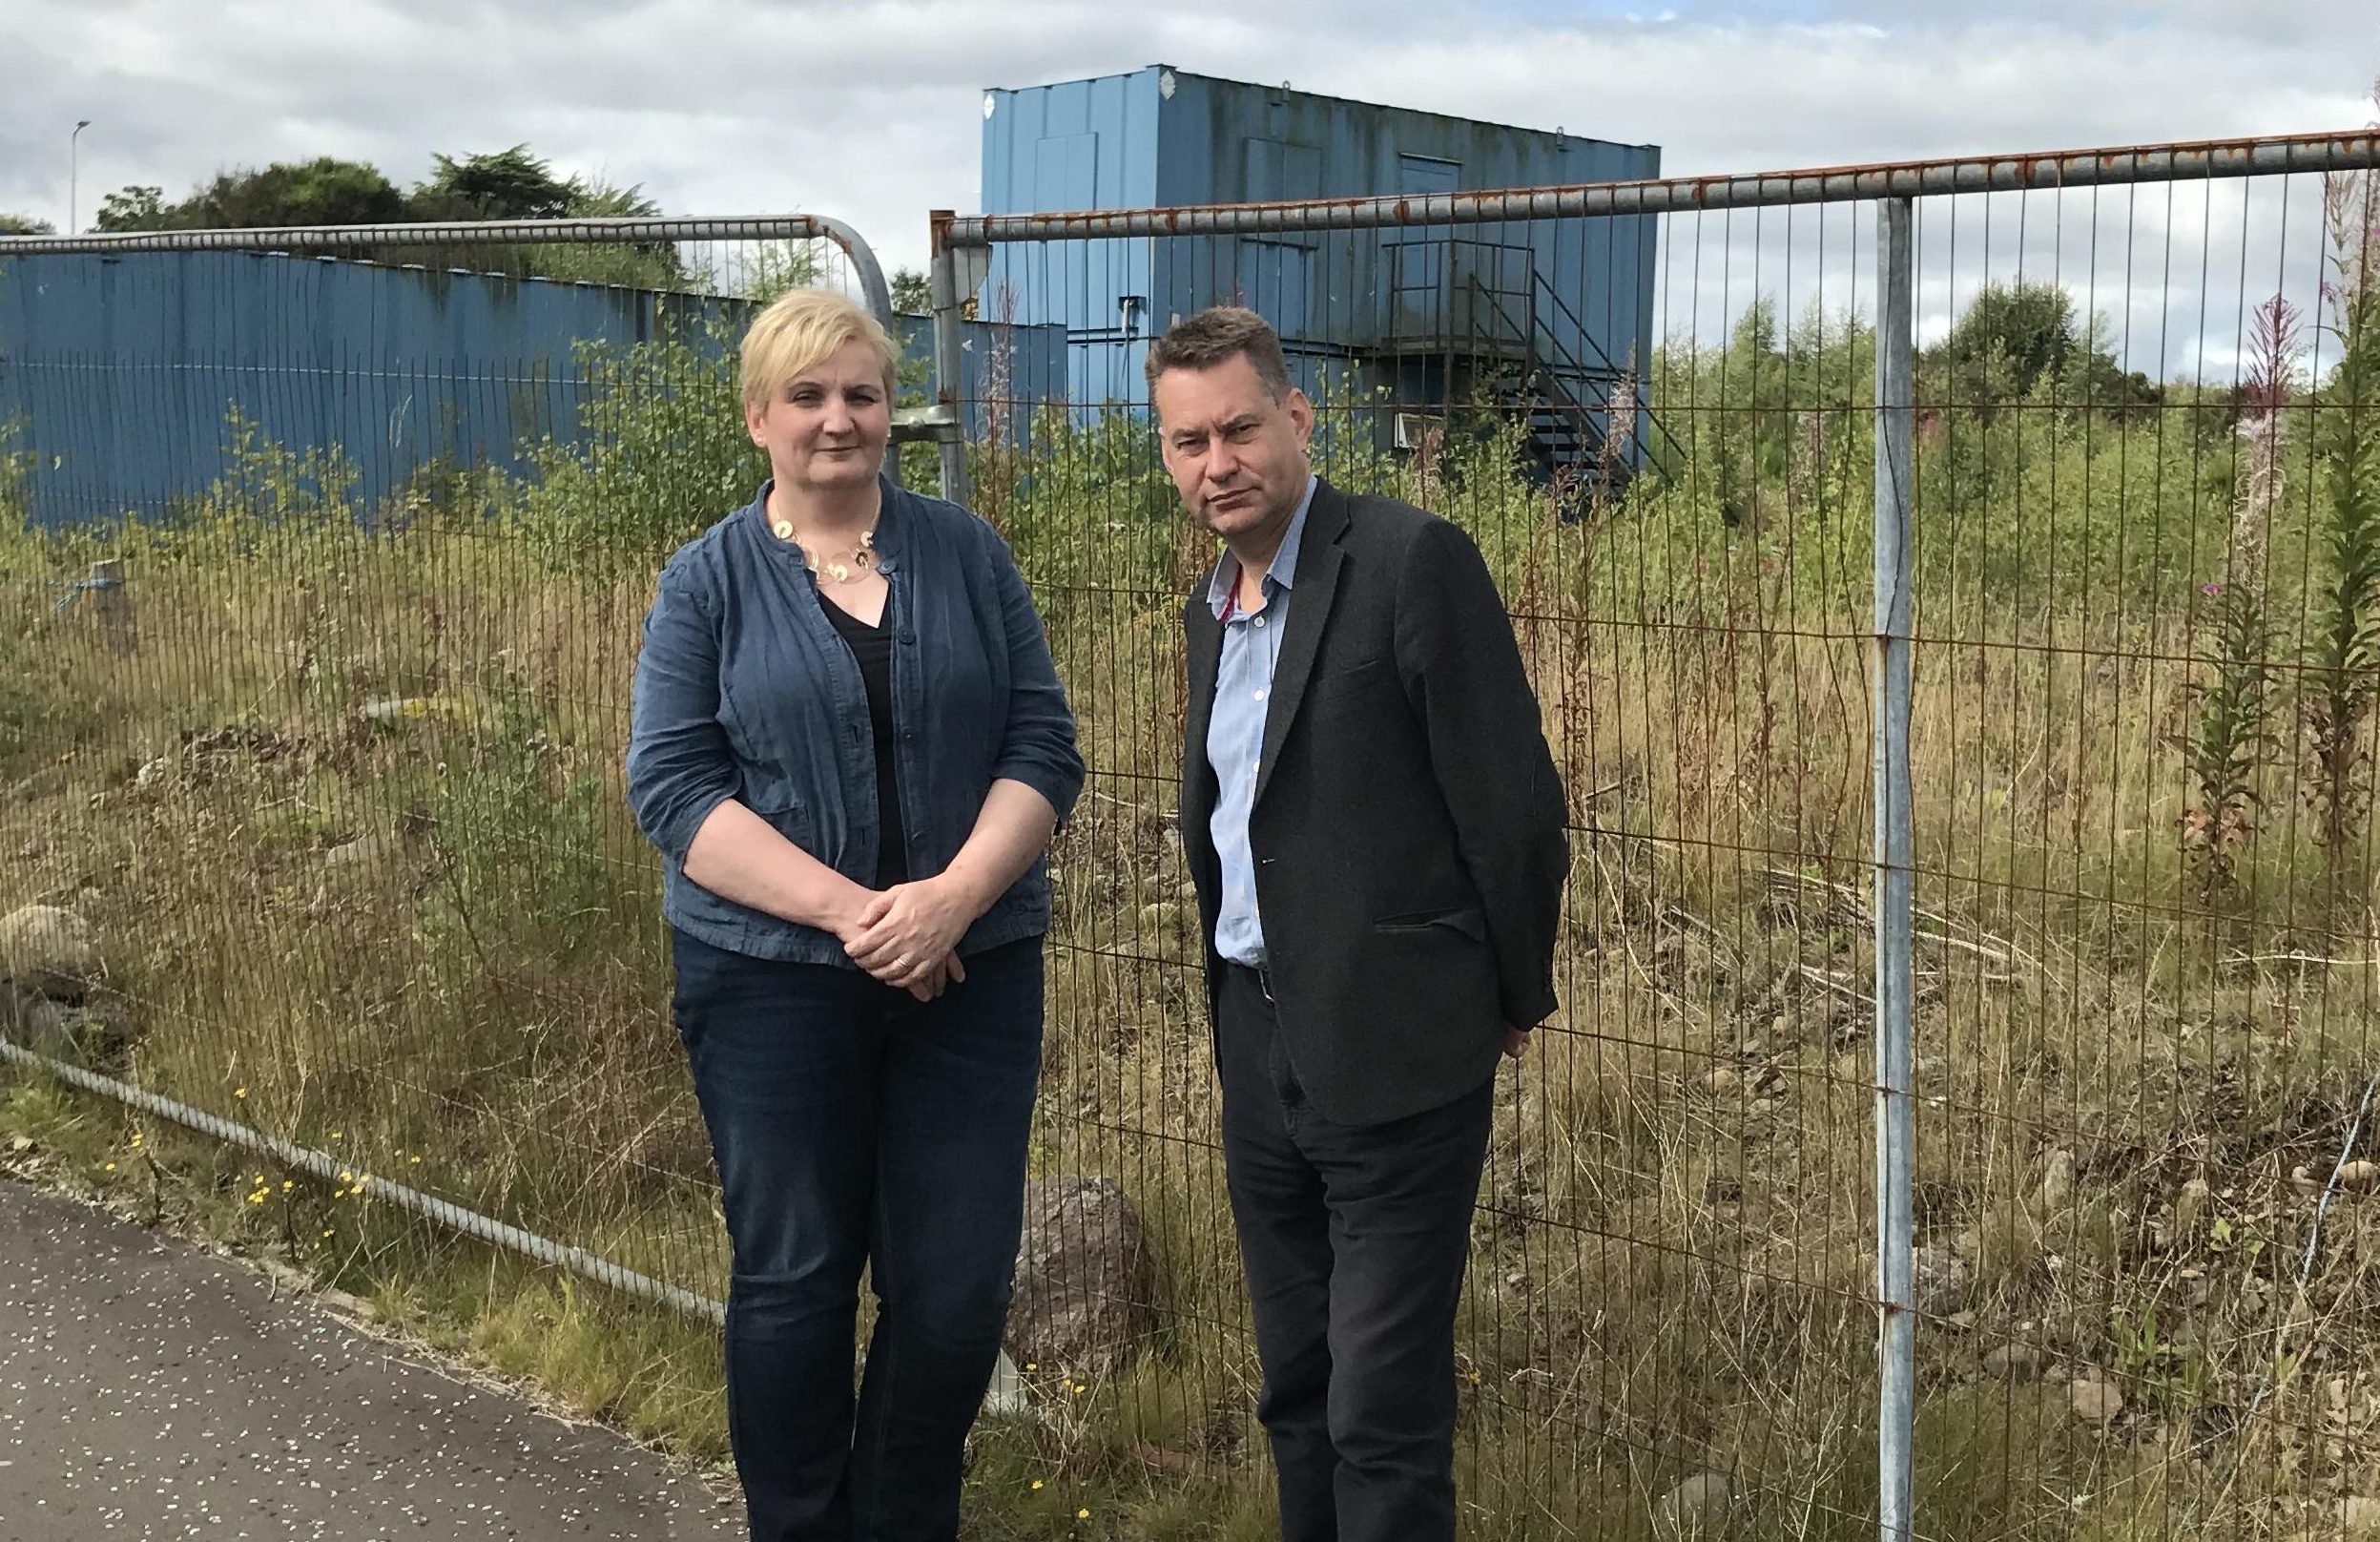 Councillor Caroline Shiers and Murdo Fraser MSP at the Blairgowrie site.